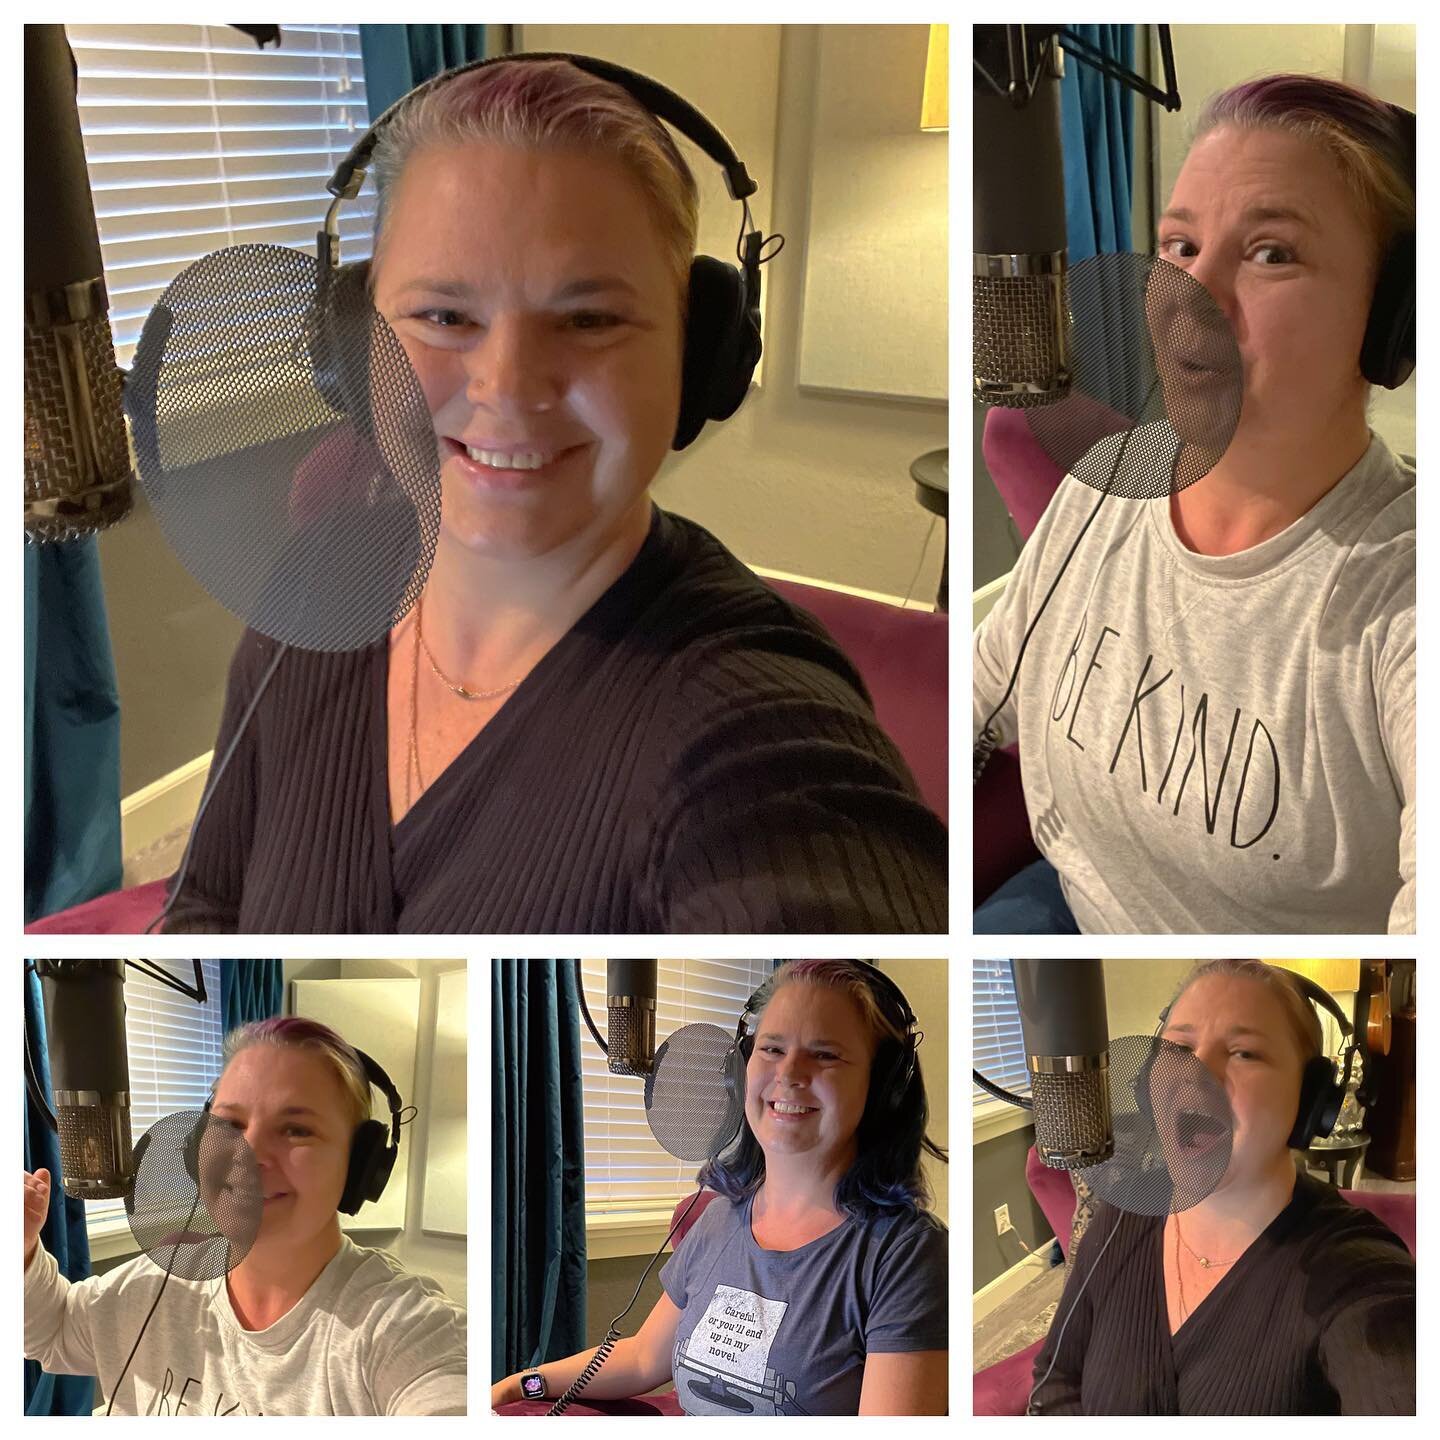 I am thrilled to announce the upcoming release of the audiobook for Fortune Favors The Brave!! I had soooo much fun recording my story and feel immensely grateful that it will soon be accessible to all who prefer to listen to books! Available next mo